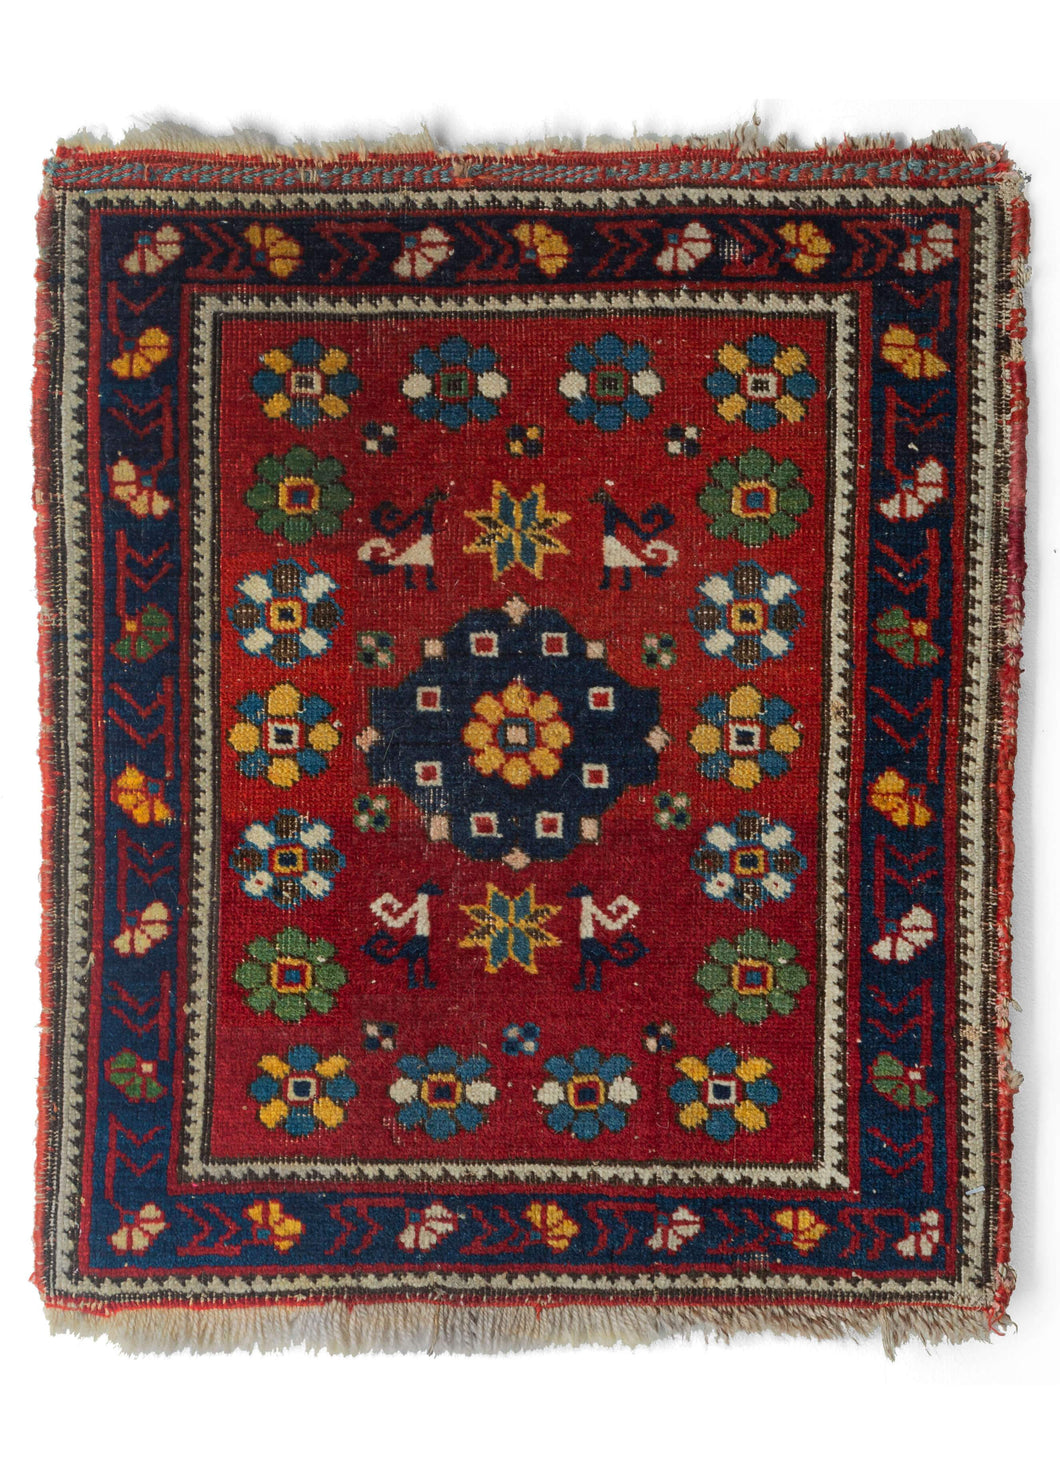 Small brightly colored Caucasian Daghestan rug with primary colored flowers very pop